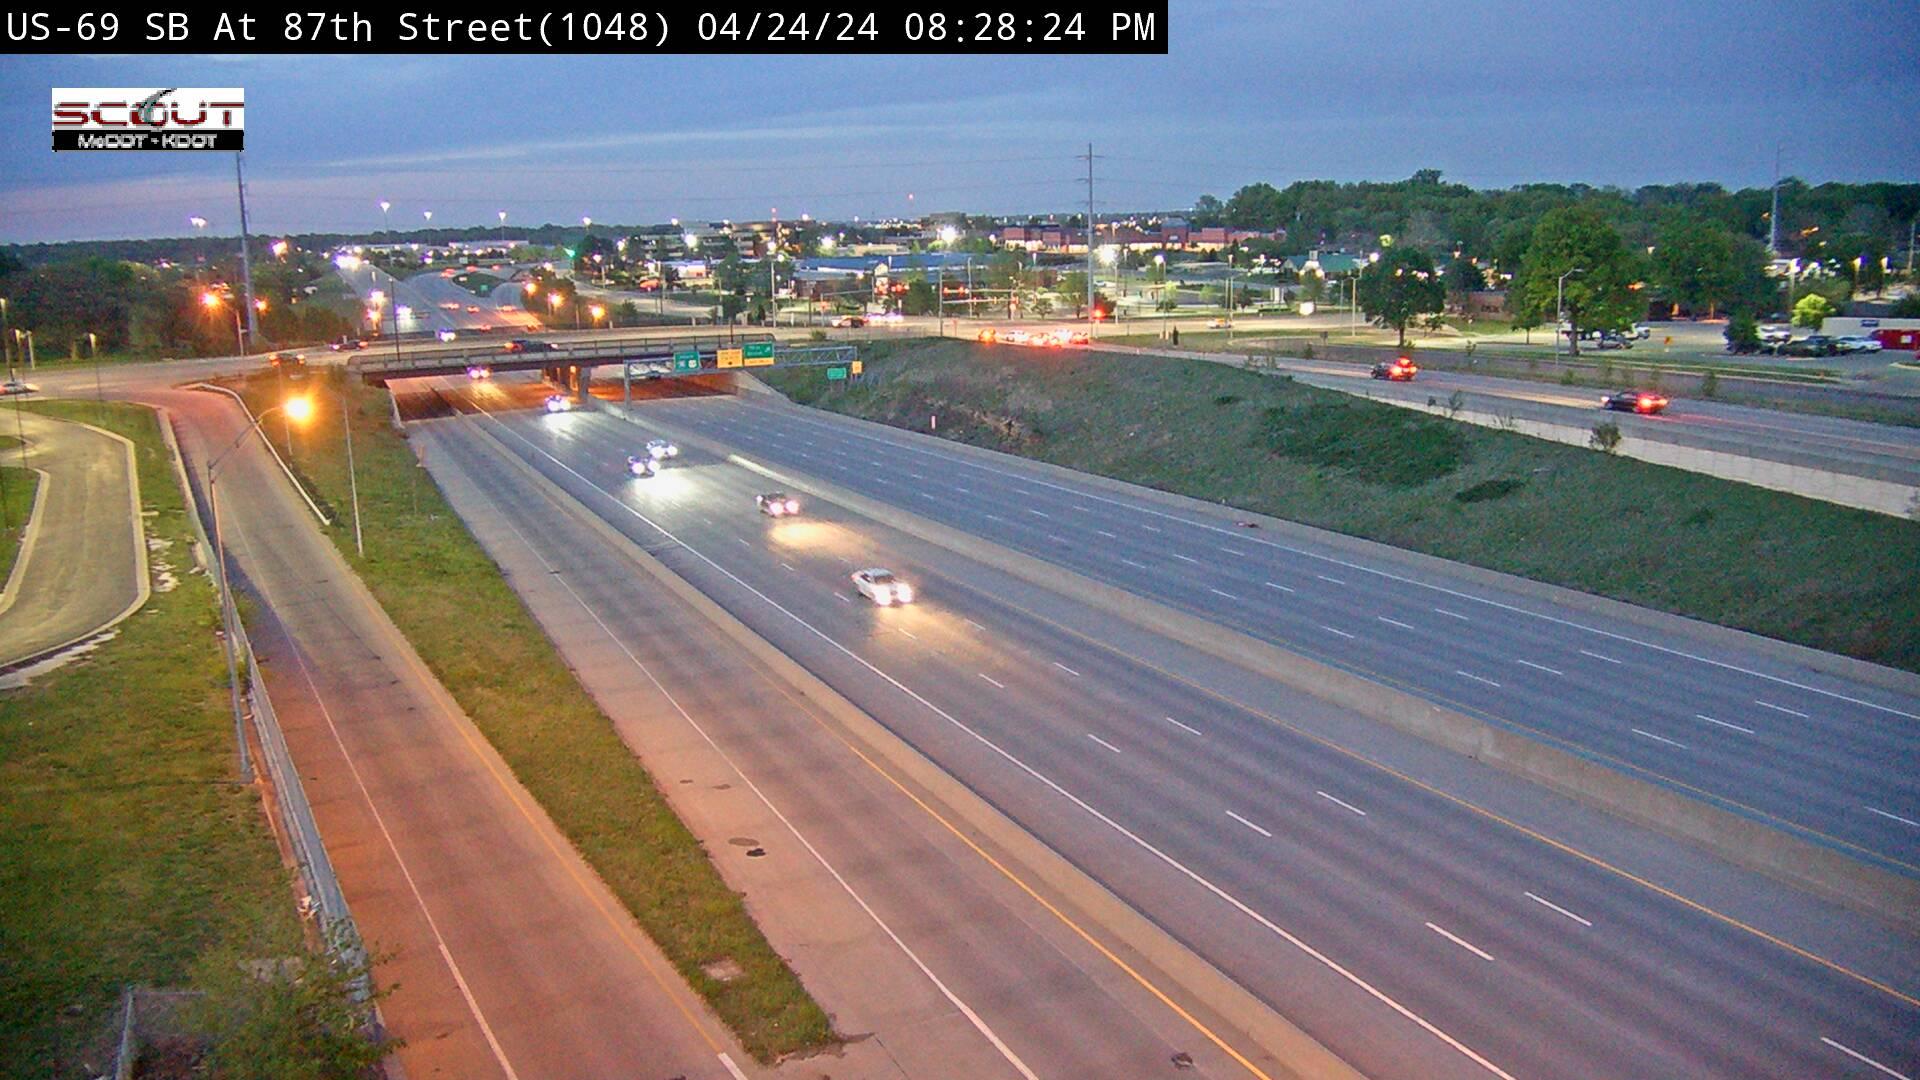 Traffic Cam Overland Park: US- S @ th Street Player